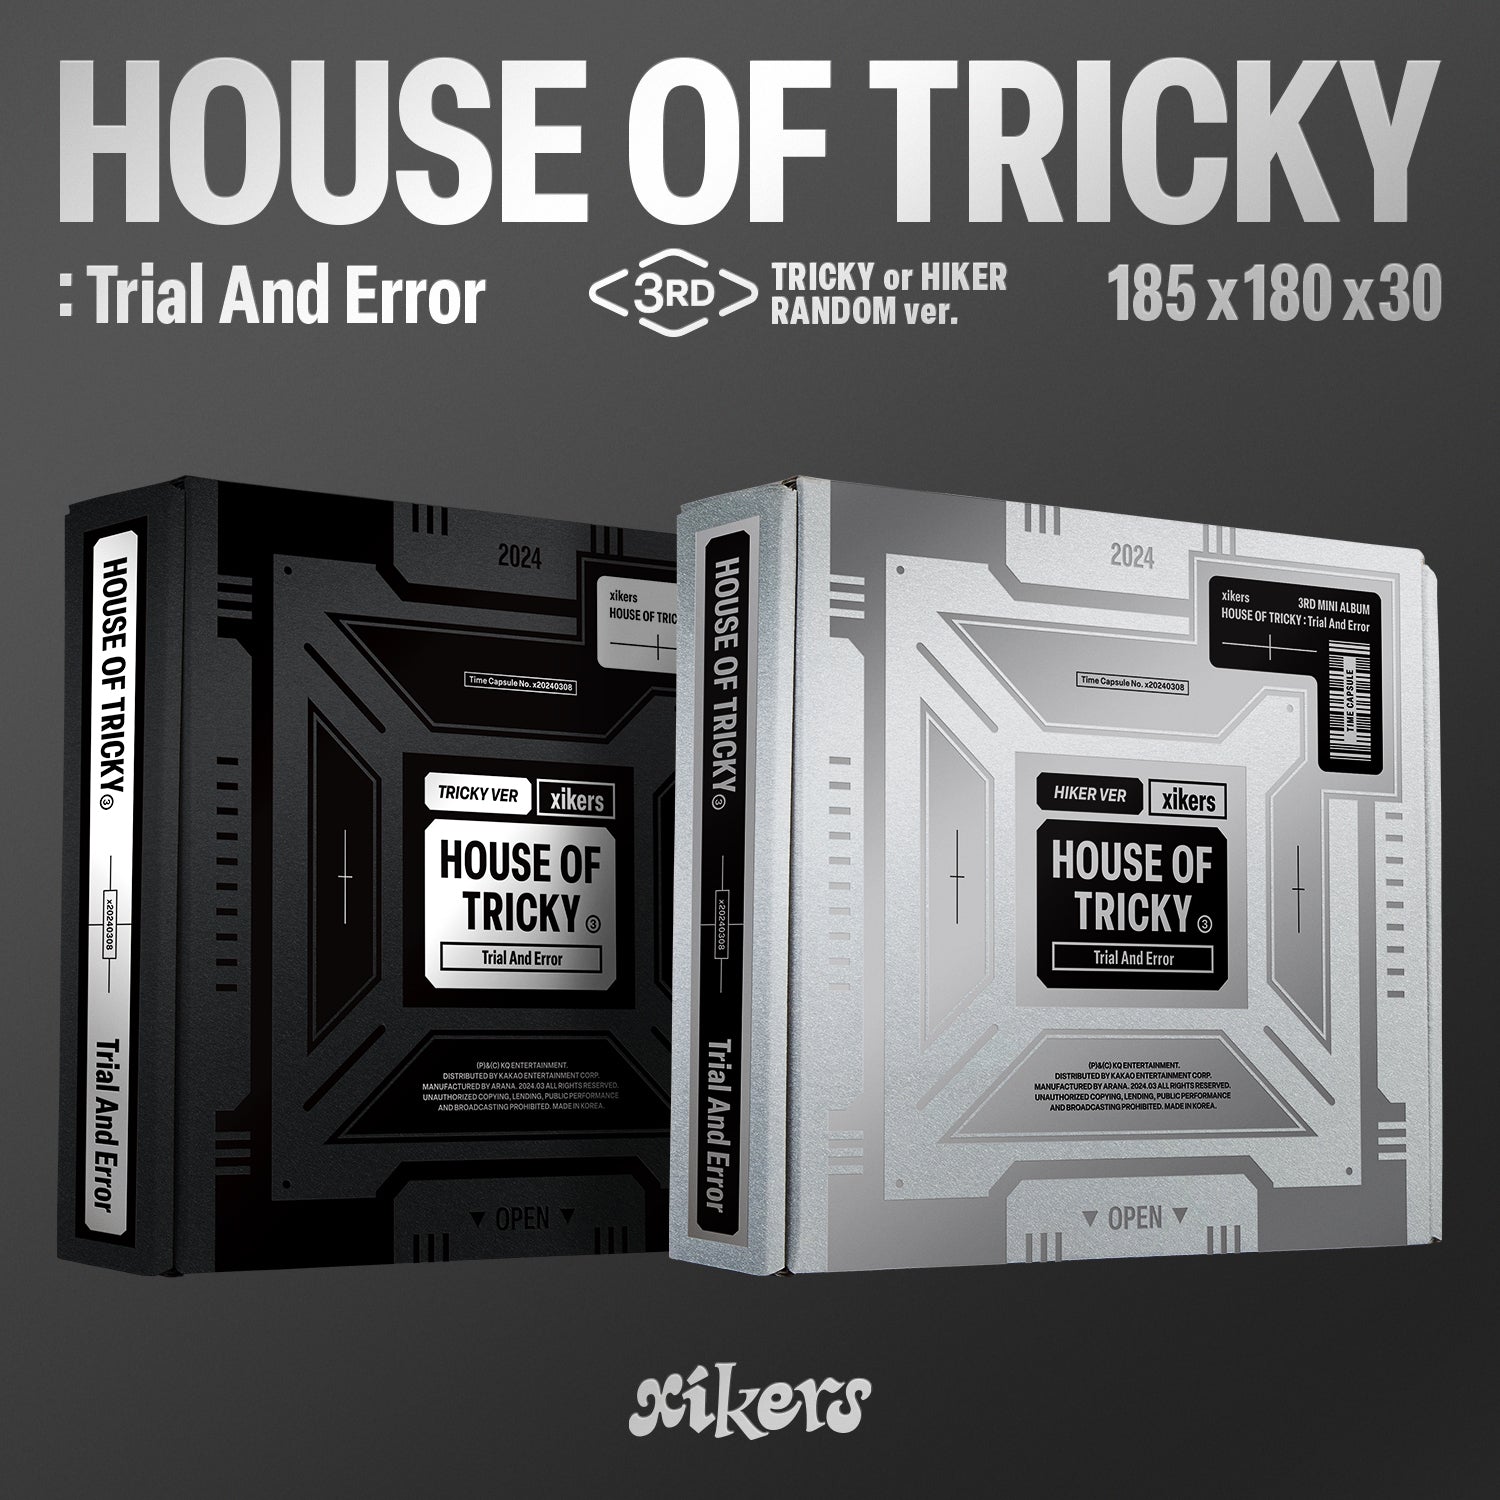 xikers - 3RD MINI ALBUM [HOUSE OF TRICKY : Trial And Error 